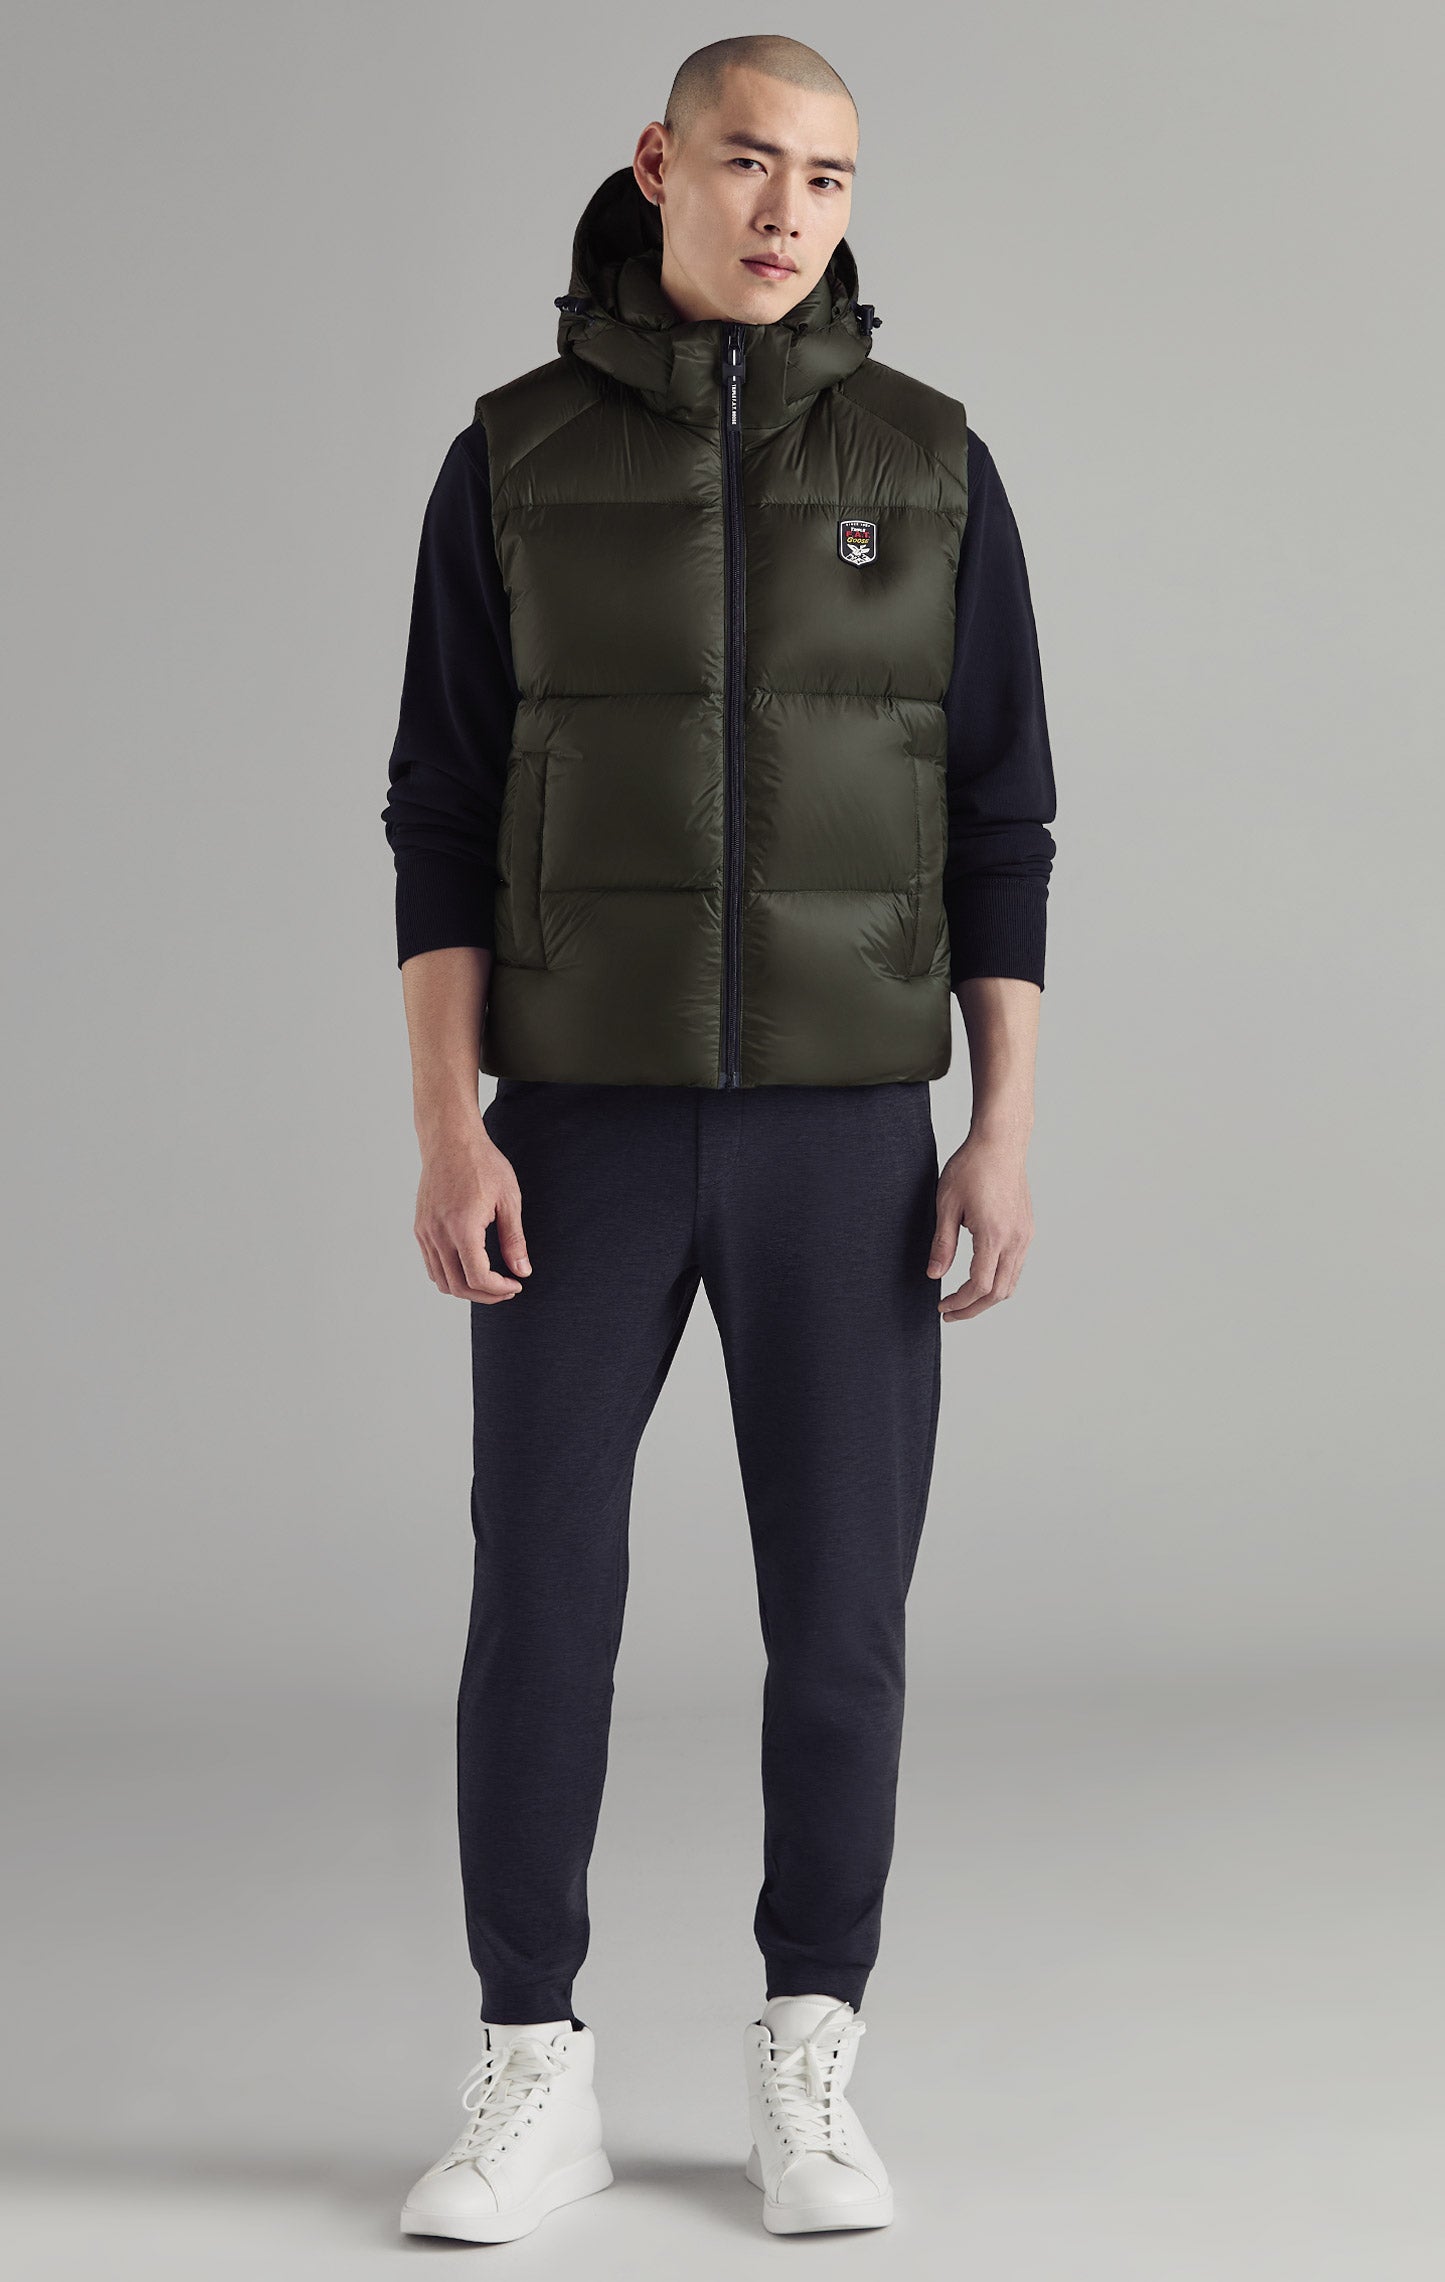 Andrew Light Weight Quilted Jacket - Olive